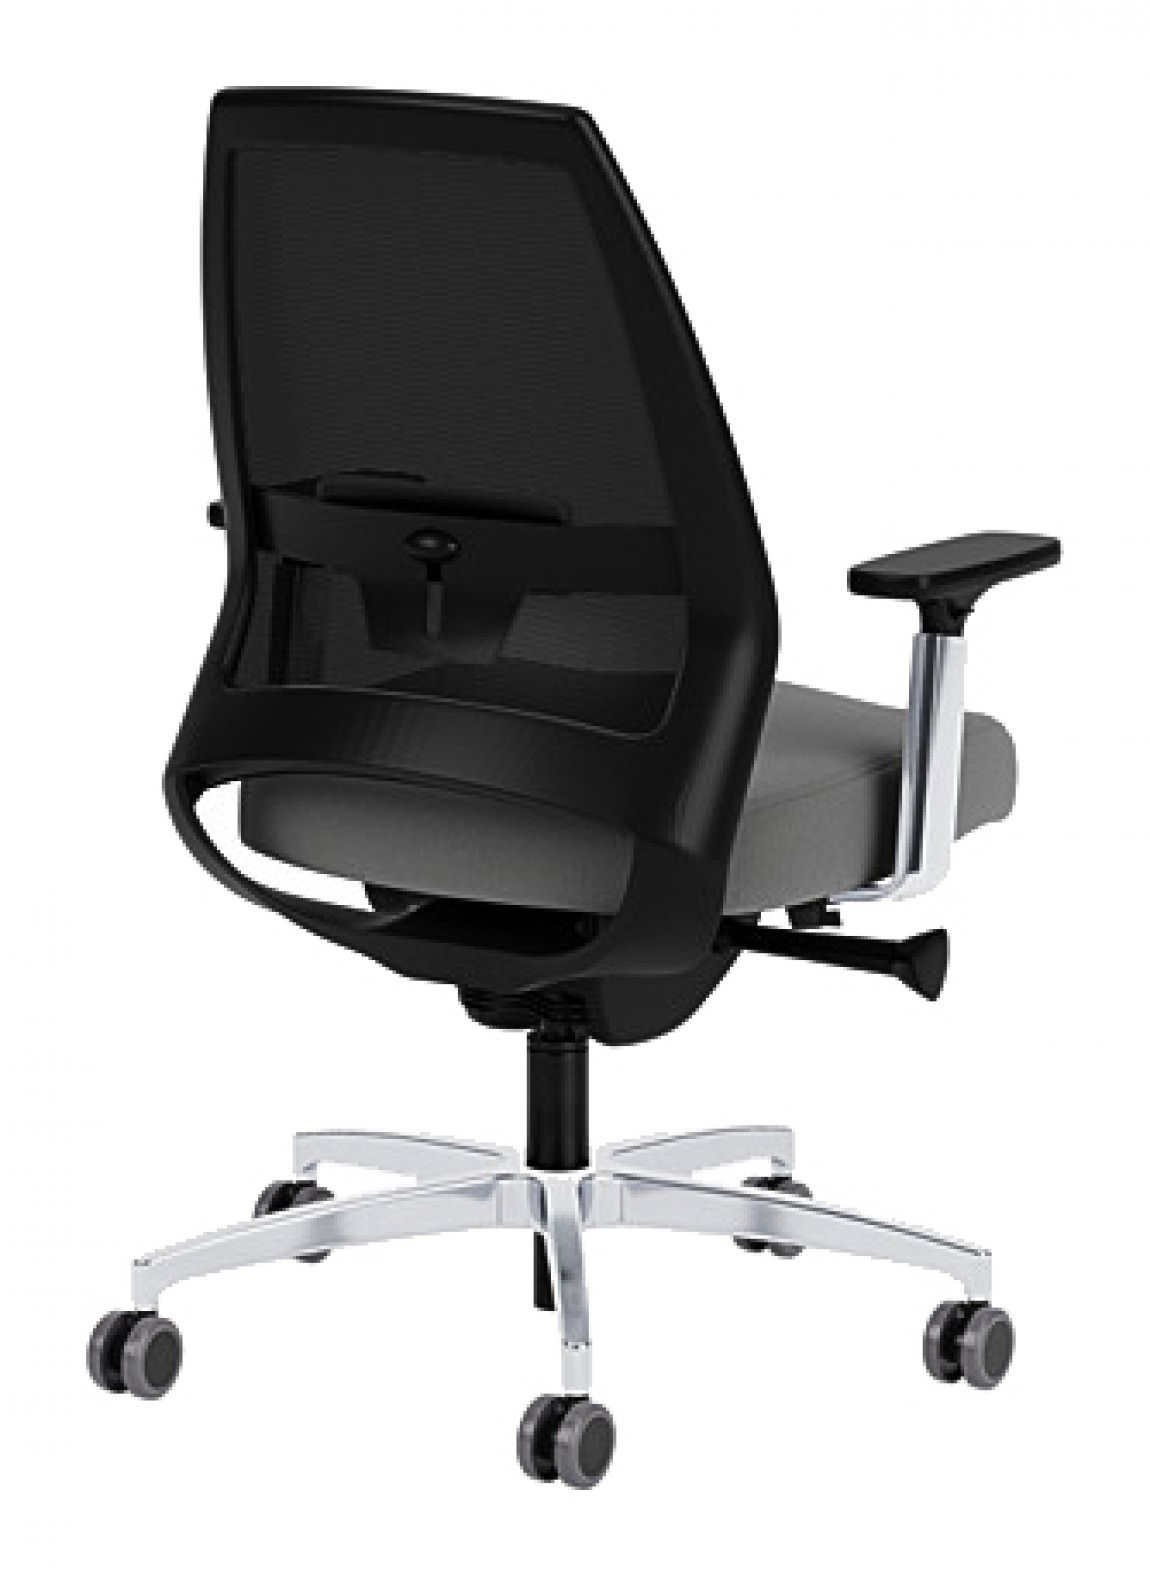 Adjustable Mesh Back Office Chair